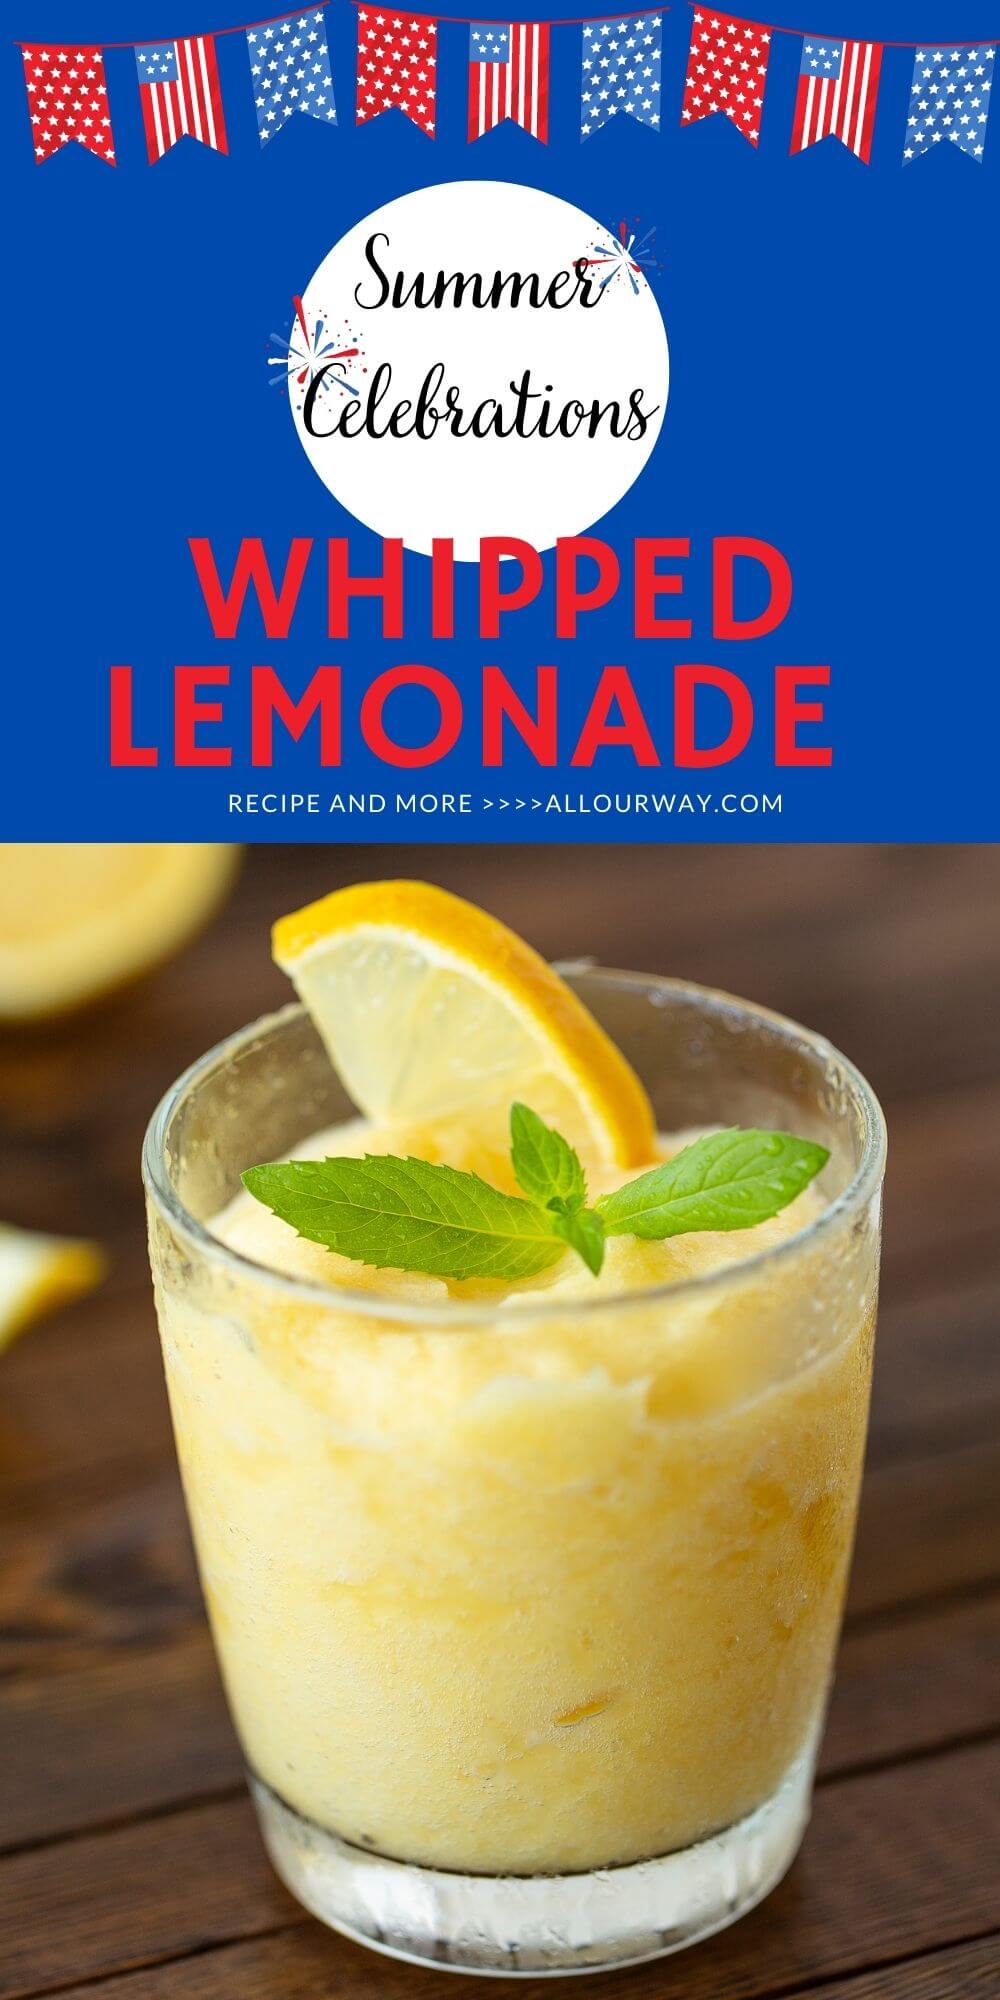 Whipped frozen lemonade combines the creaminess of a milkshake with the thirst-quenching tanginess of freshly squeezed lemonade for a fantastic refreshing treat. Just four ingredients is all that's needed.